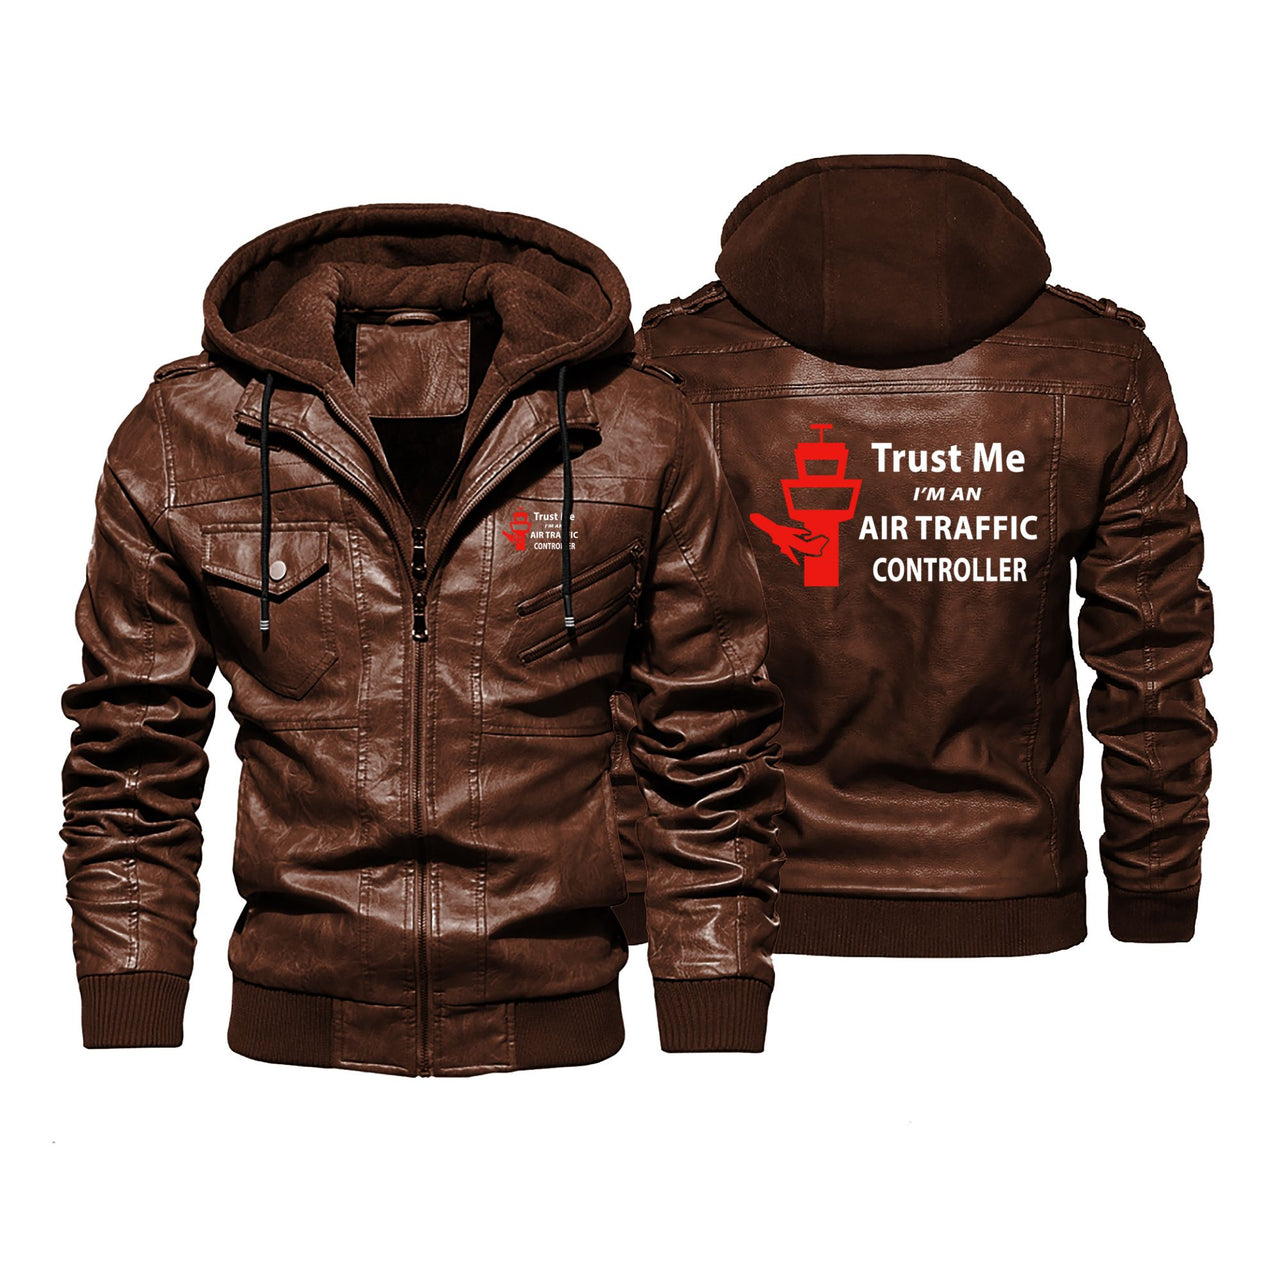 Trust Me I'm an Air Traffic Controller Designed Hooded Leather Jackets